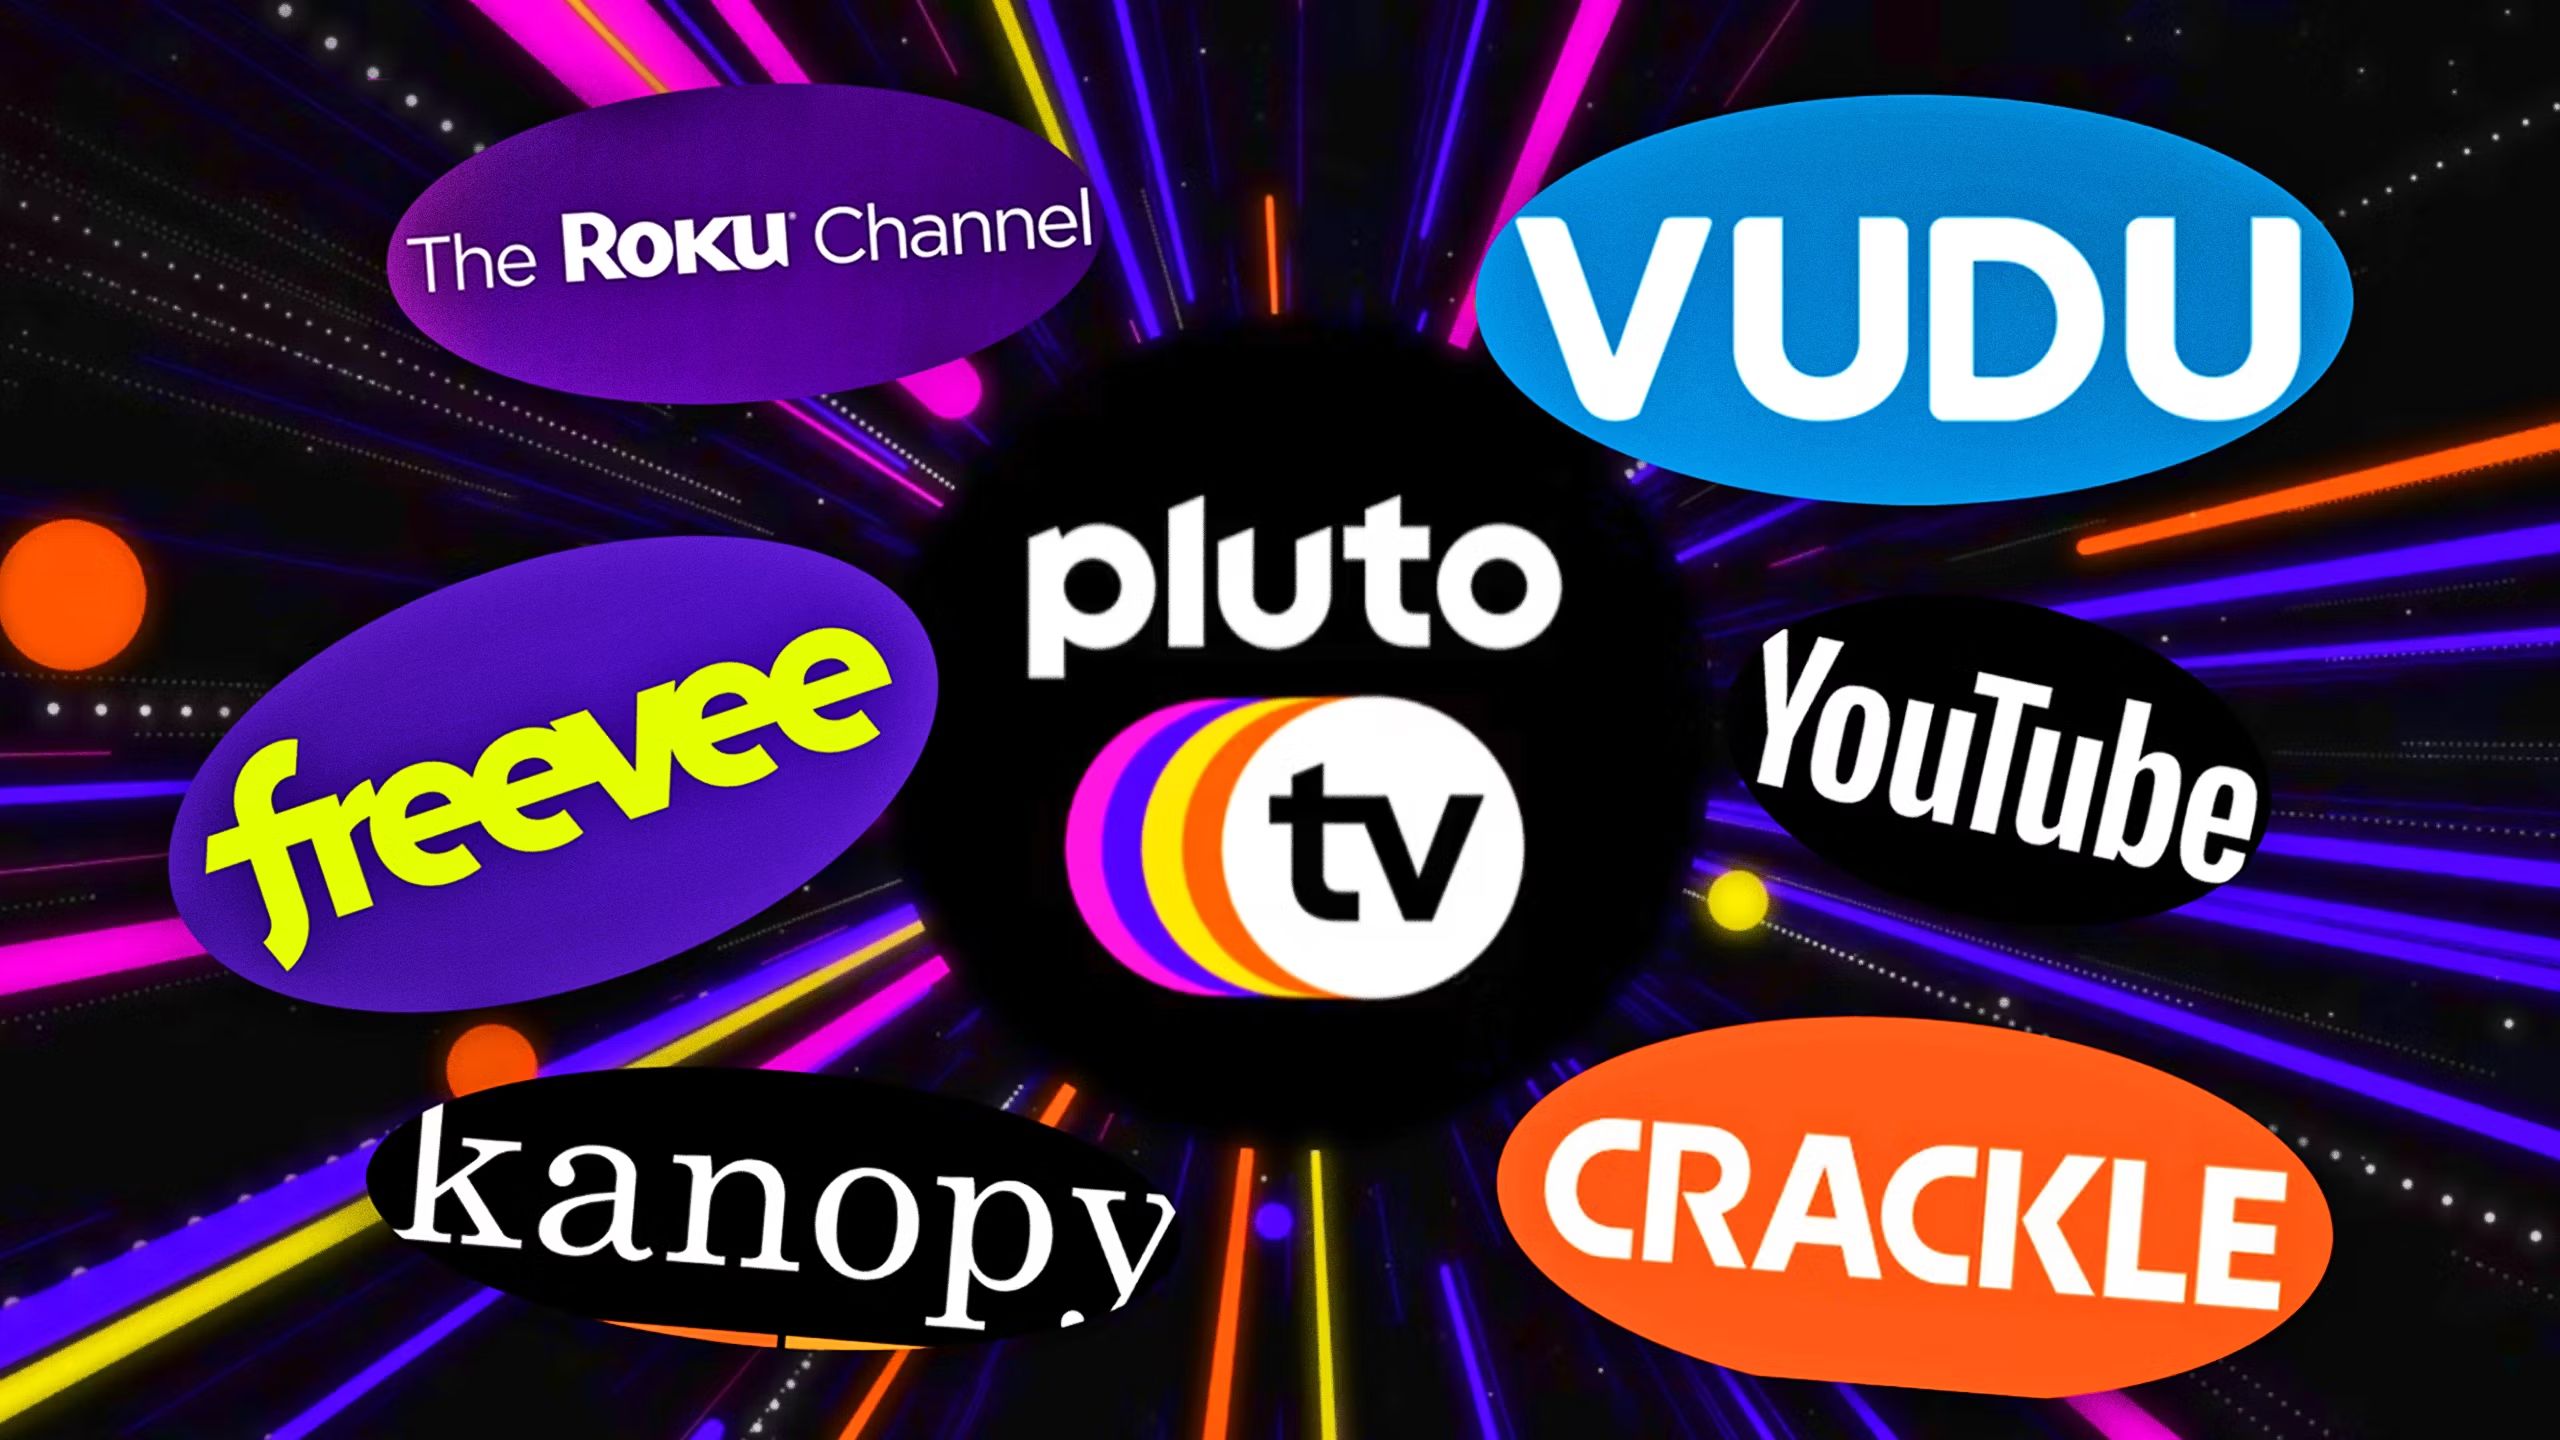 Free streaming service logos against a black and rainbow striped background.